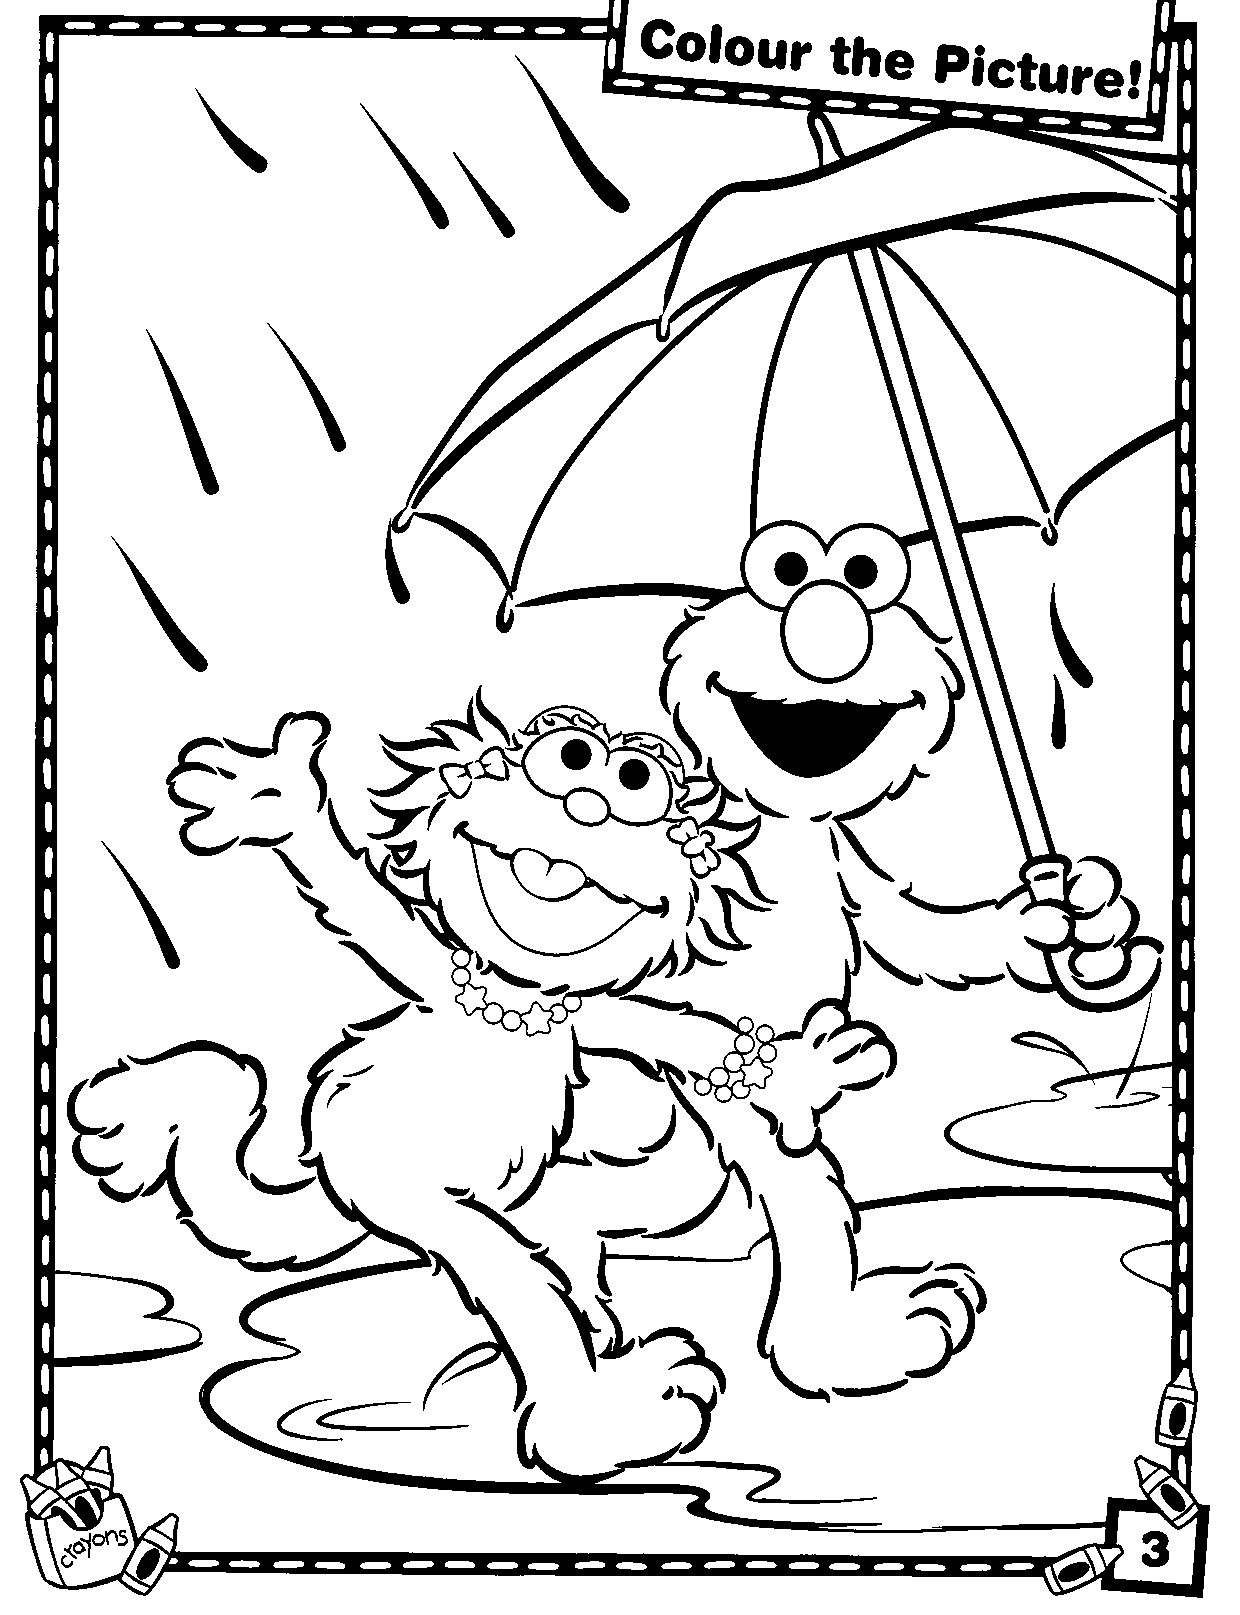 Free Printable Coloring Sheets For Toddlers
 Free Printable Elmo Coloring Pages For Kids